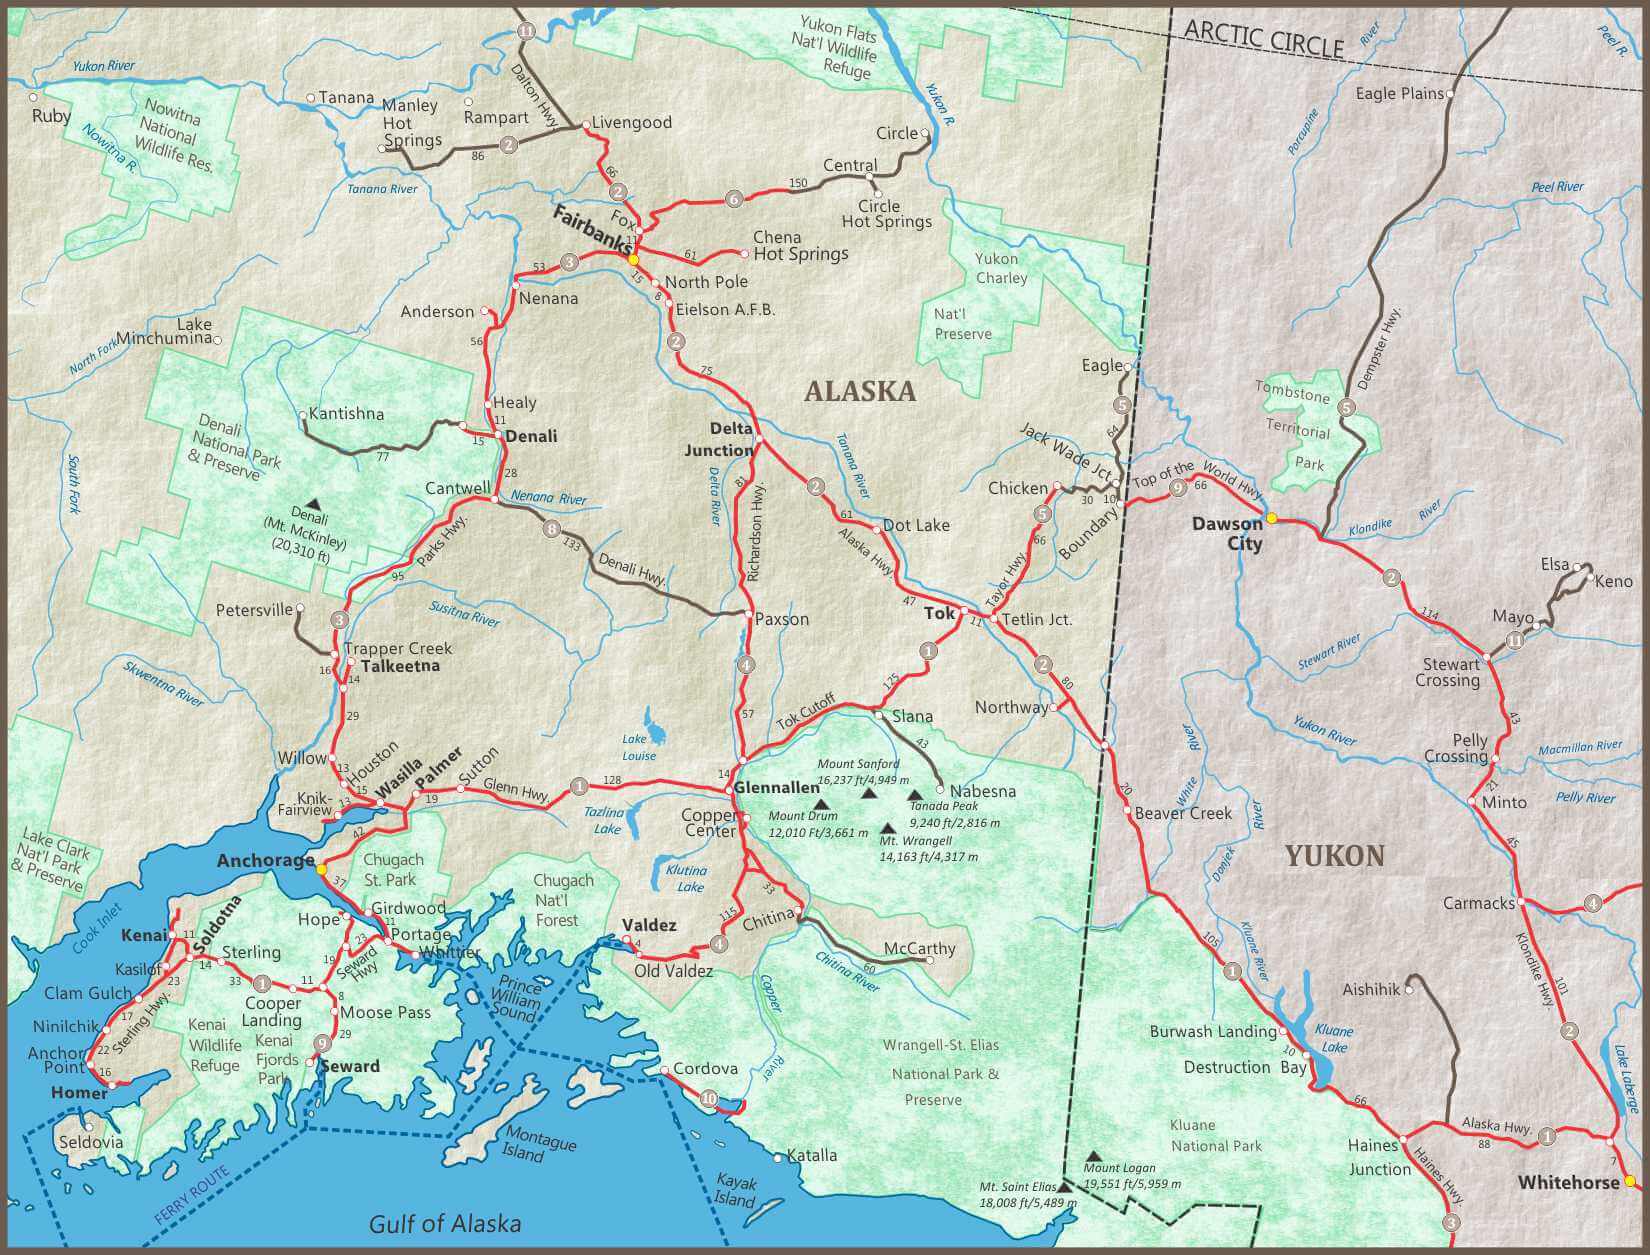 Alaska Maps: The Best City Town and Highway Maps of Alaska